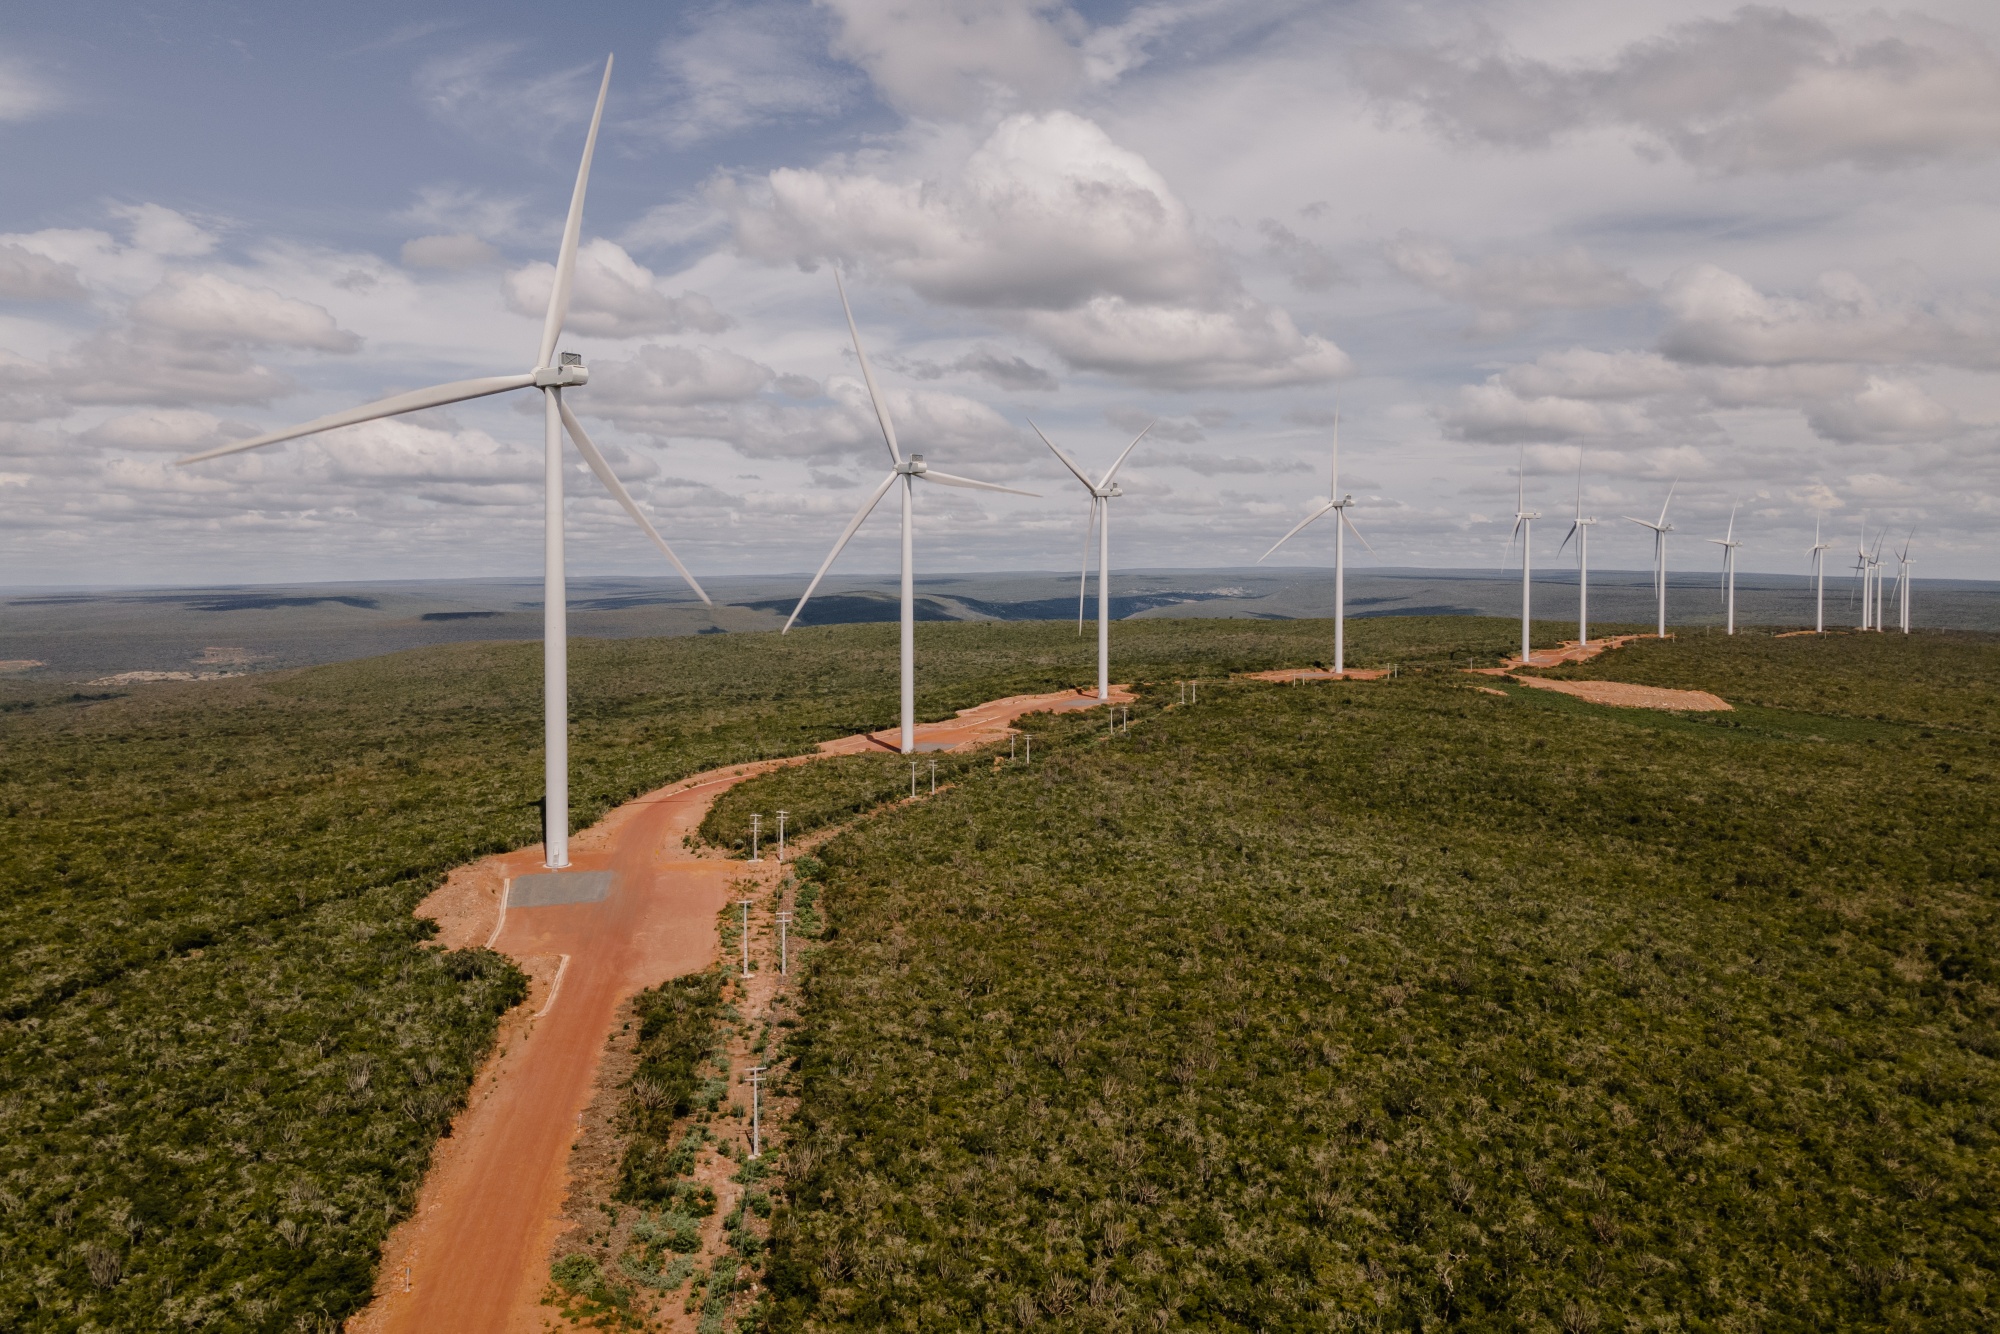 Brazil held talks with Mexico, Chile, Germany over green bond project